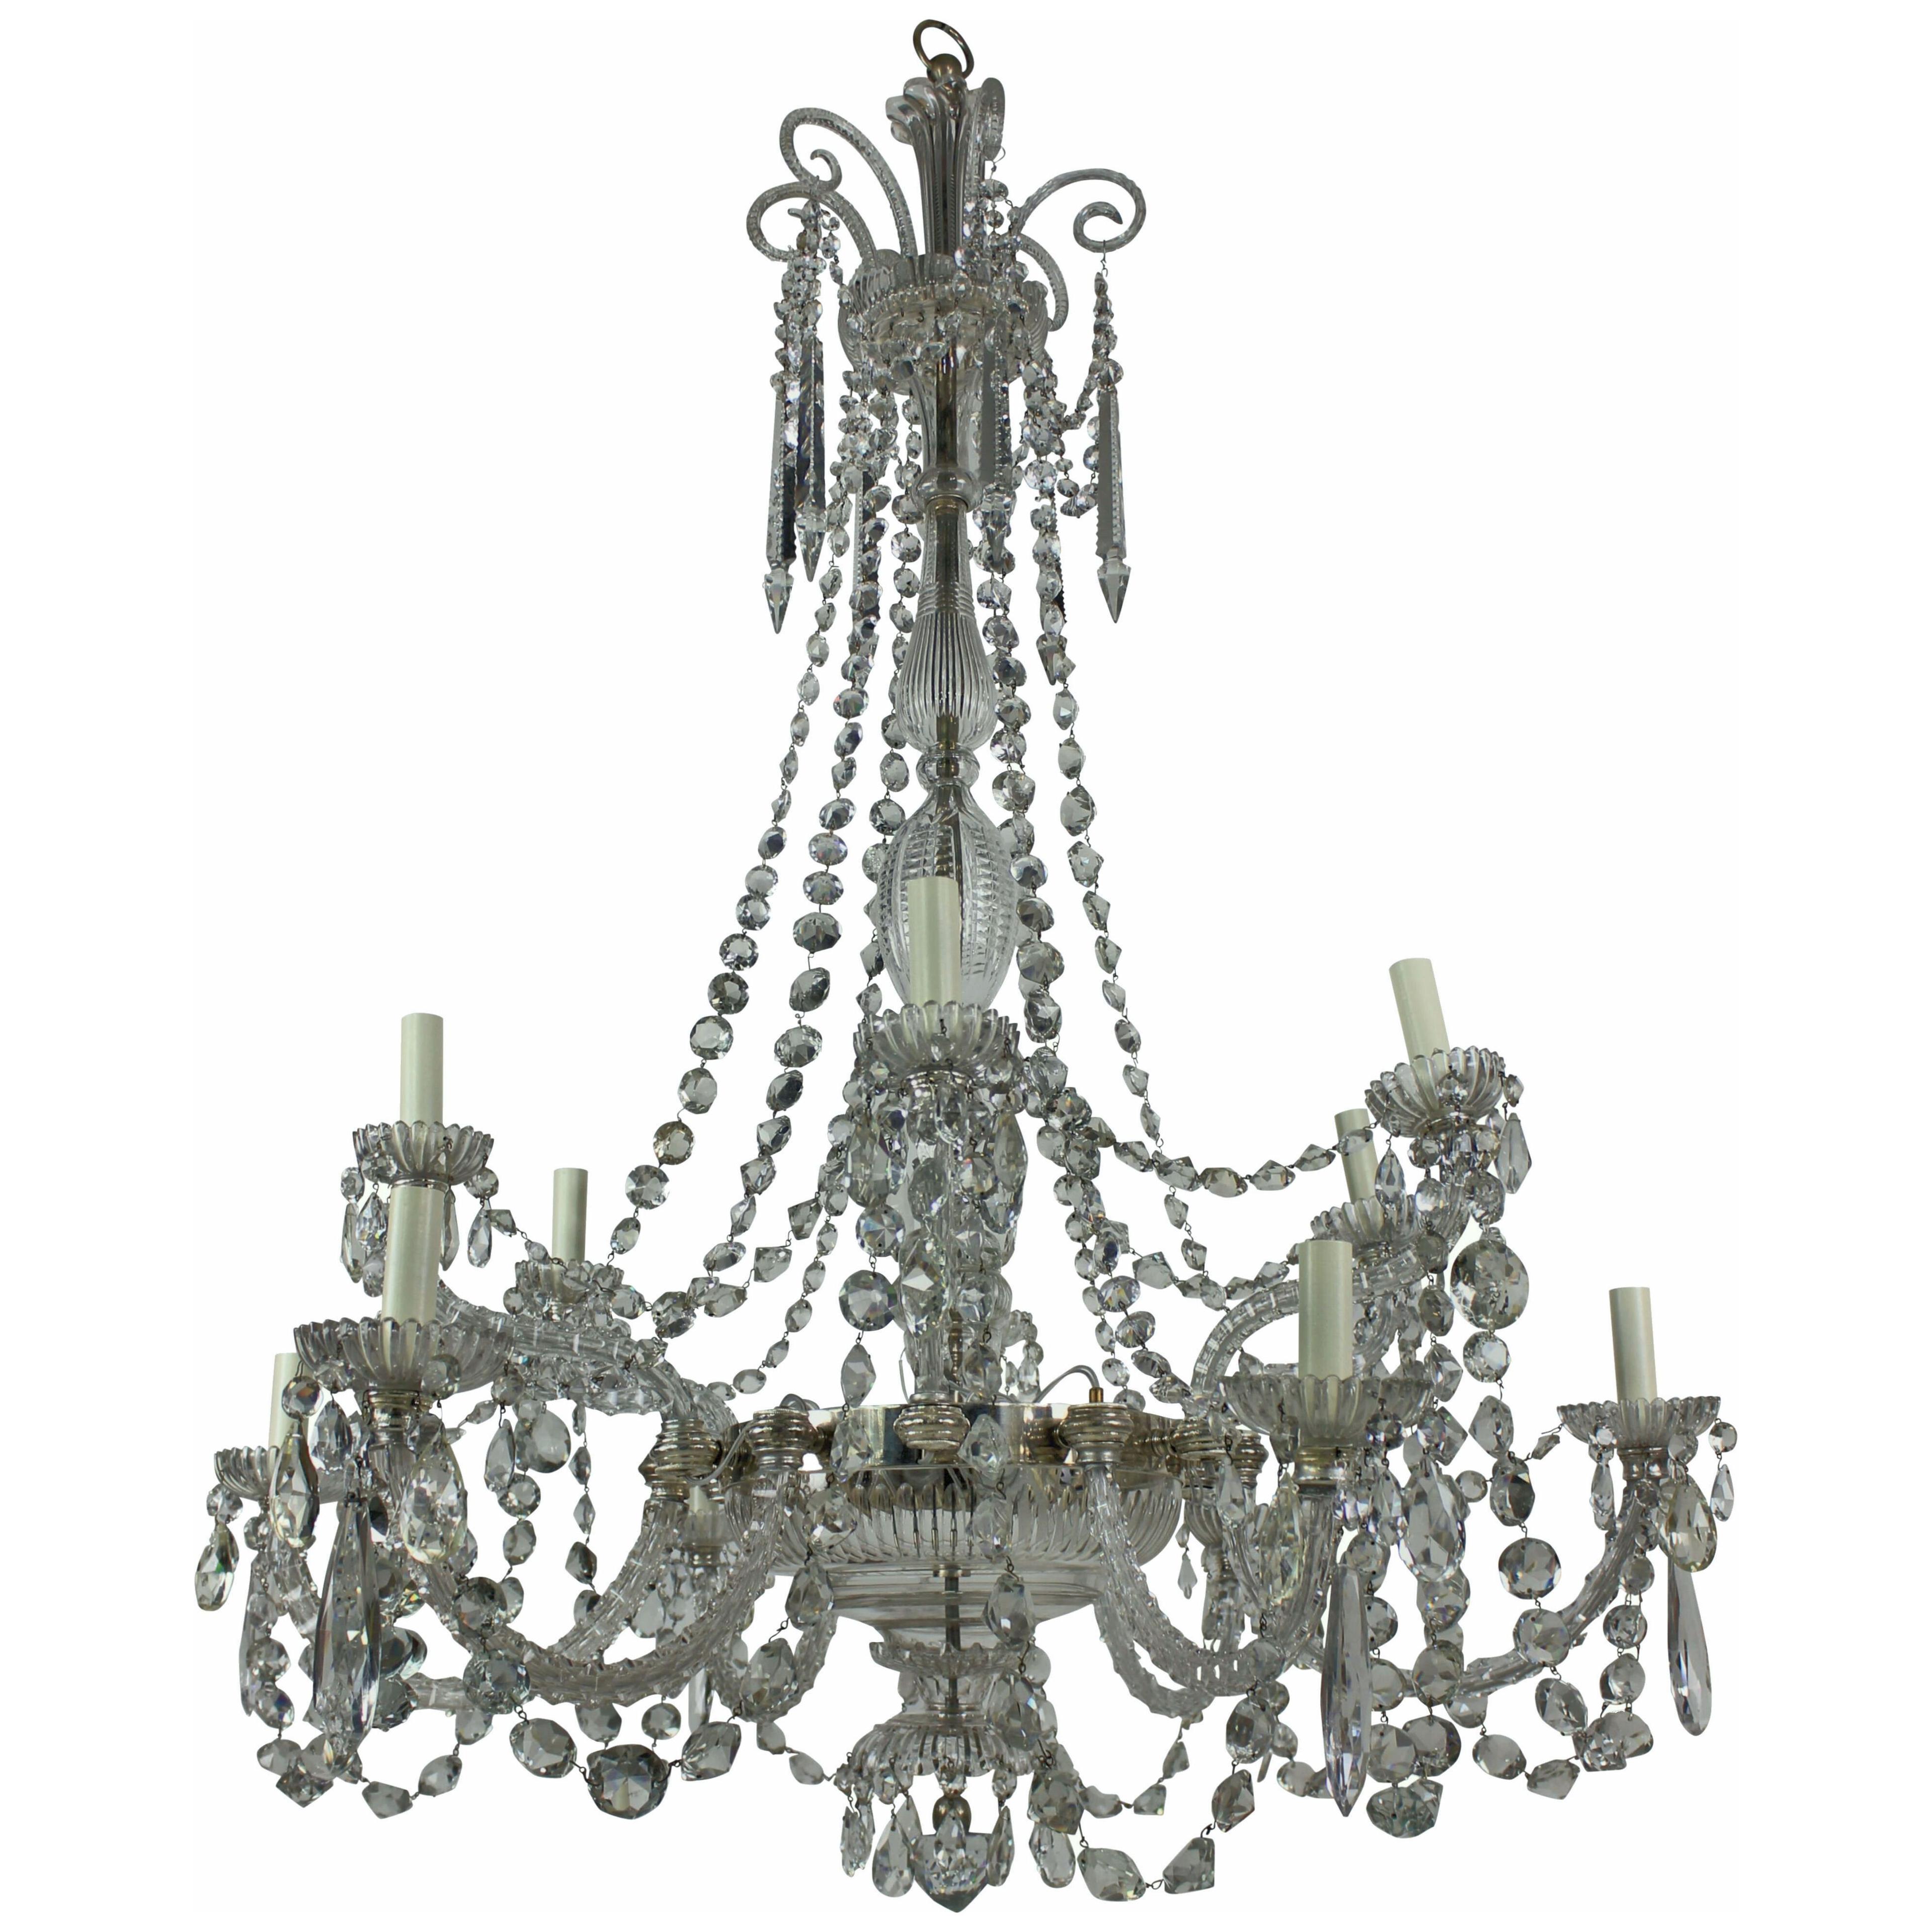 A LARGE ENGLISH TWELVE LIGHT CUT GLASS CHANDELIER BY PERRY OF FINE QUALITY